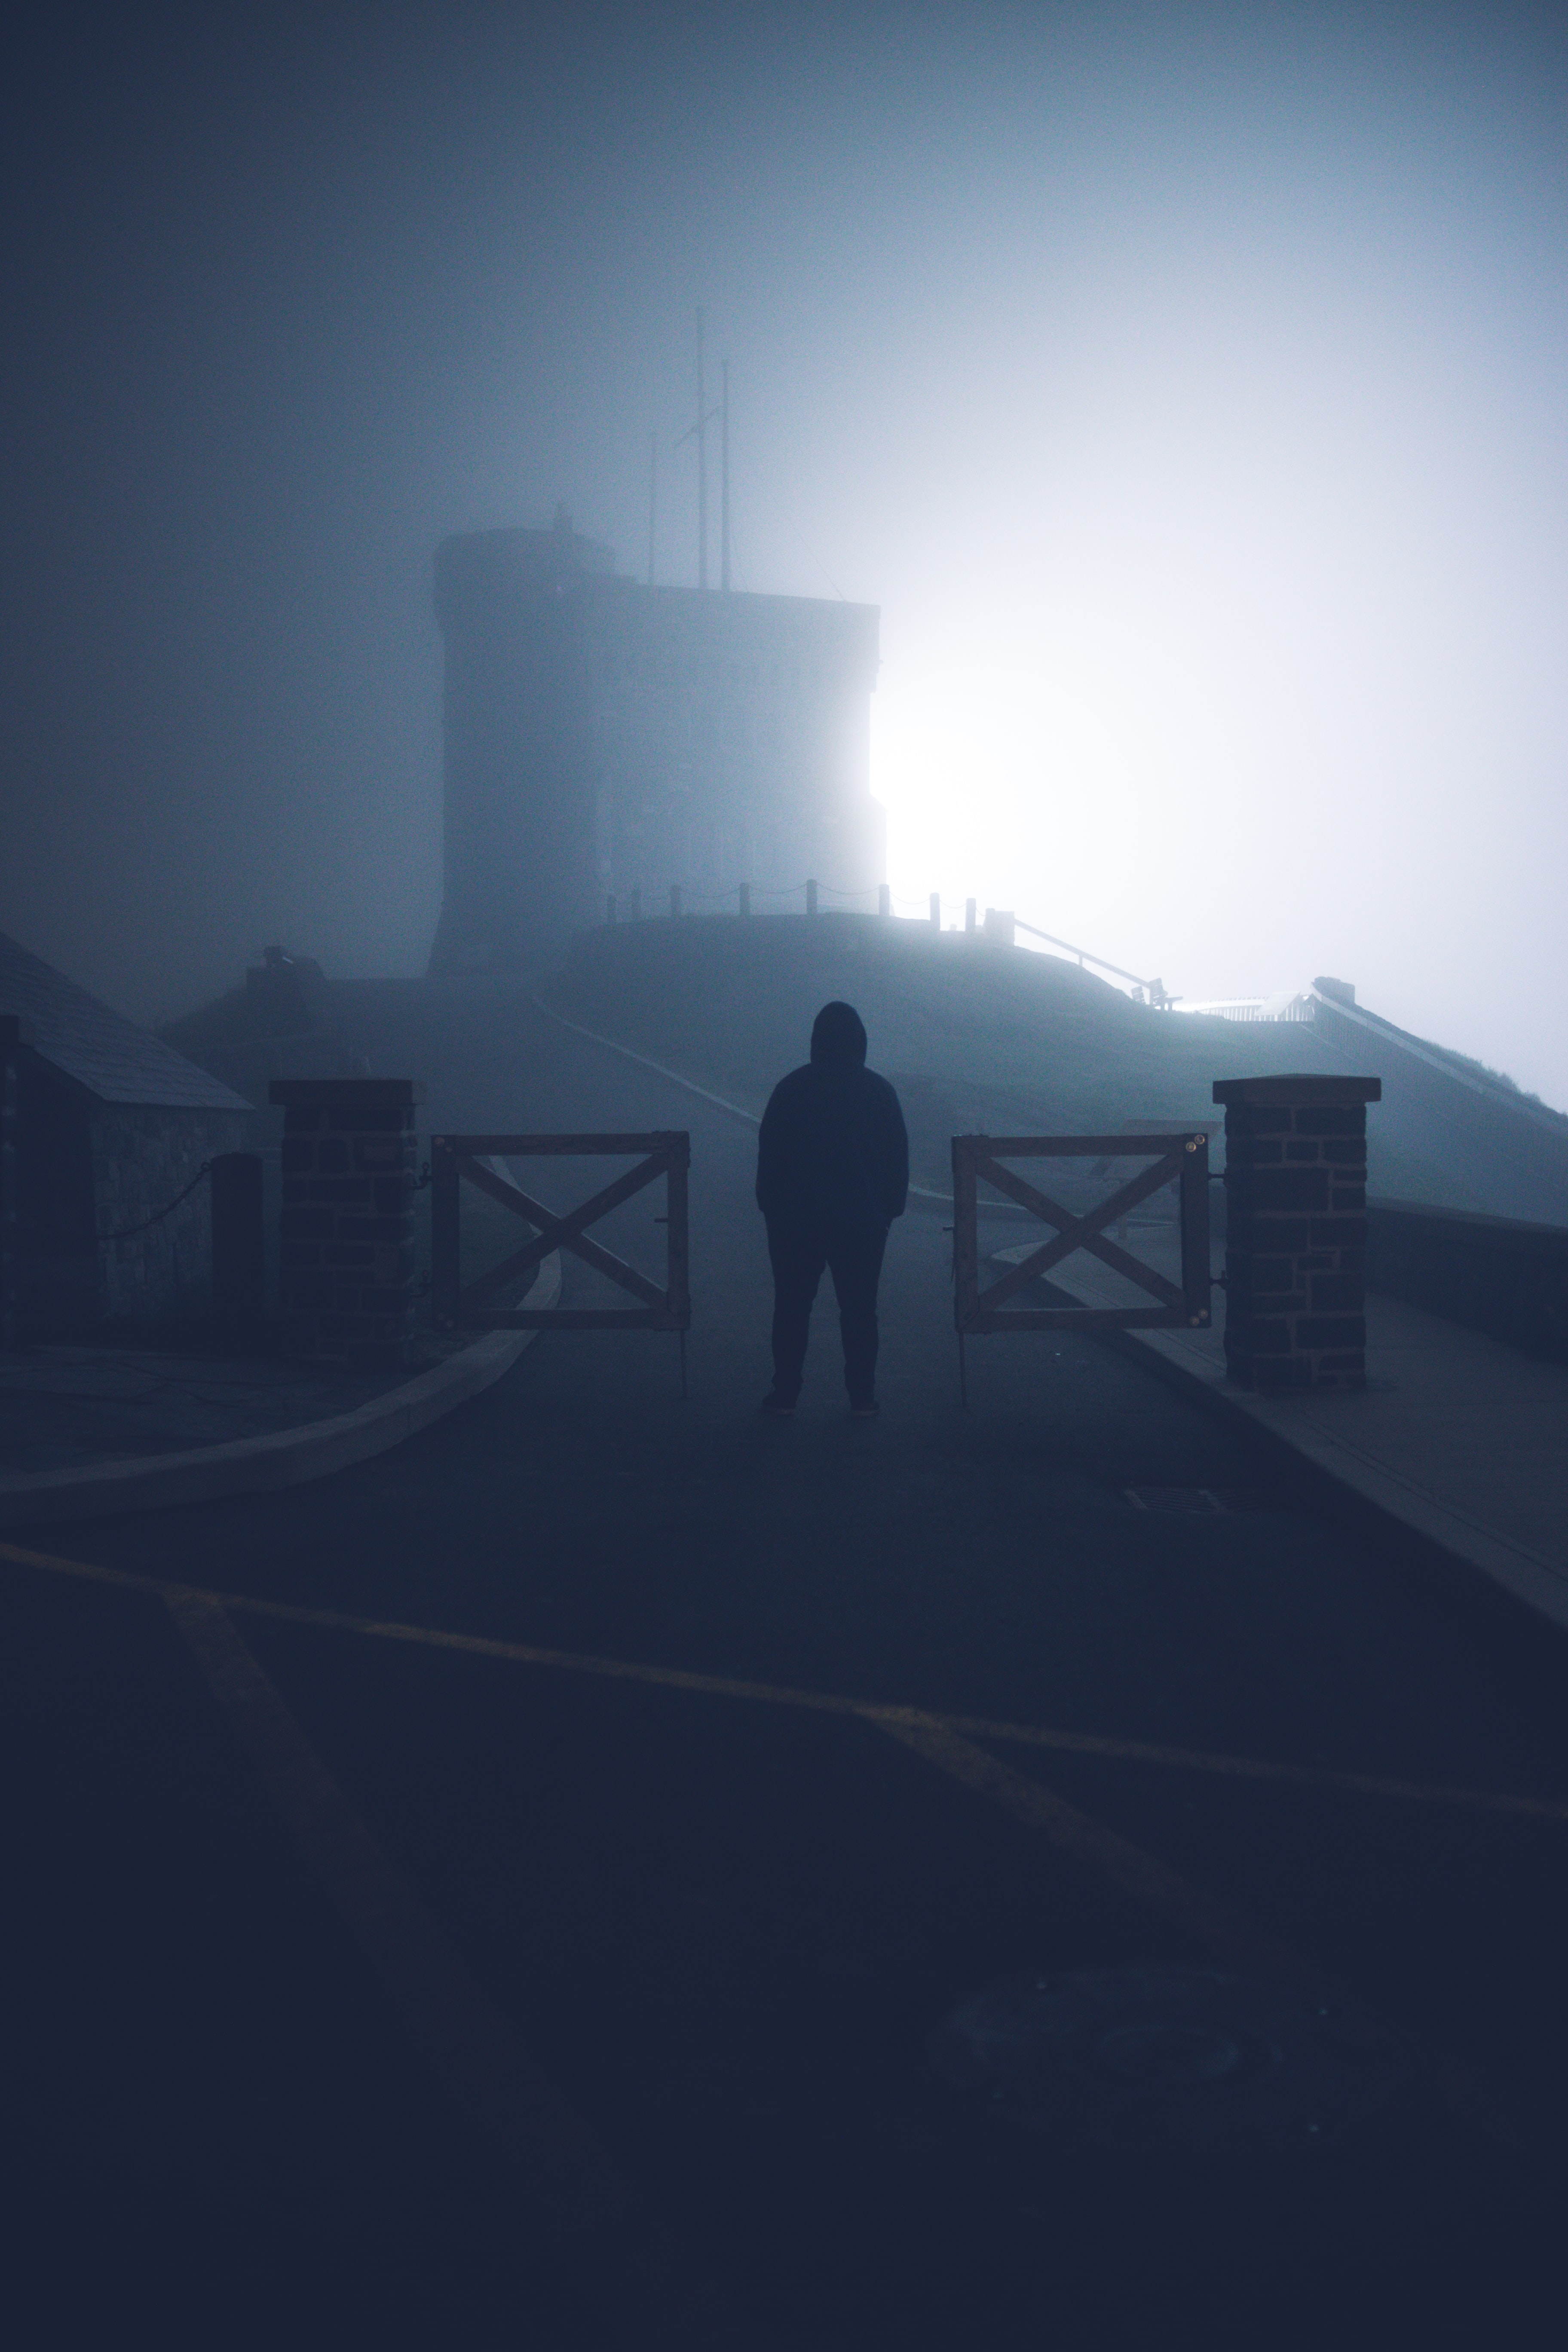 HD wallpaper sadness, nature, silhouette, fog, loneliness, alone, lonely, sorrow